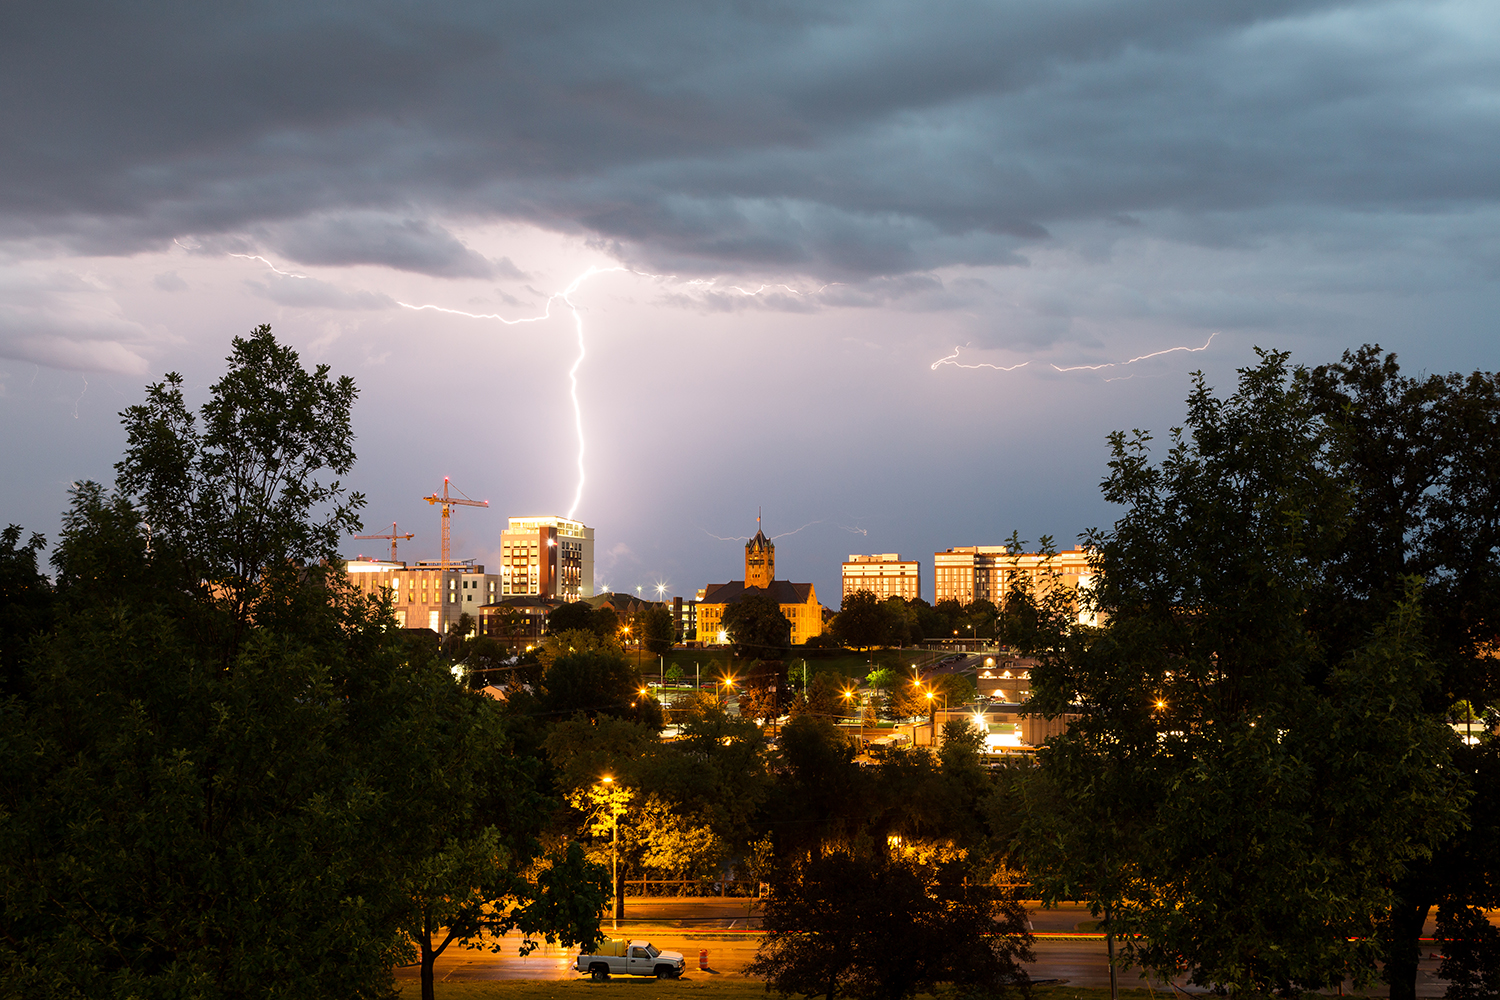  Lighting strikes a building in downtown Iowa City on Tuesday, Aug. 28, 2018.  